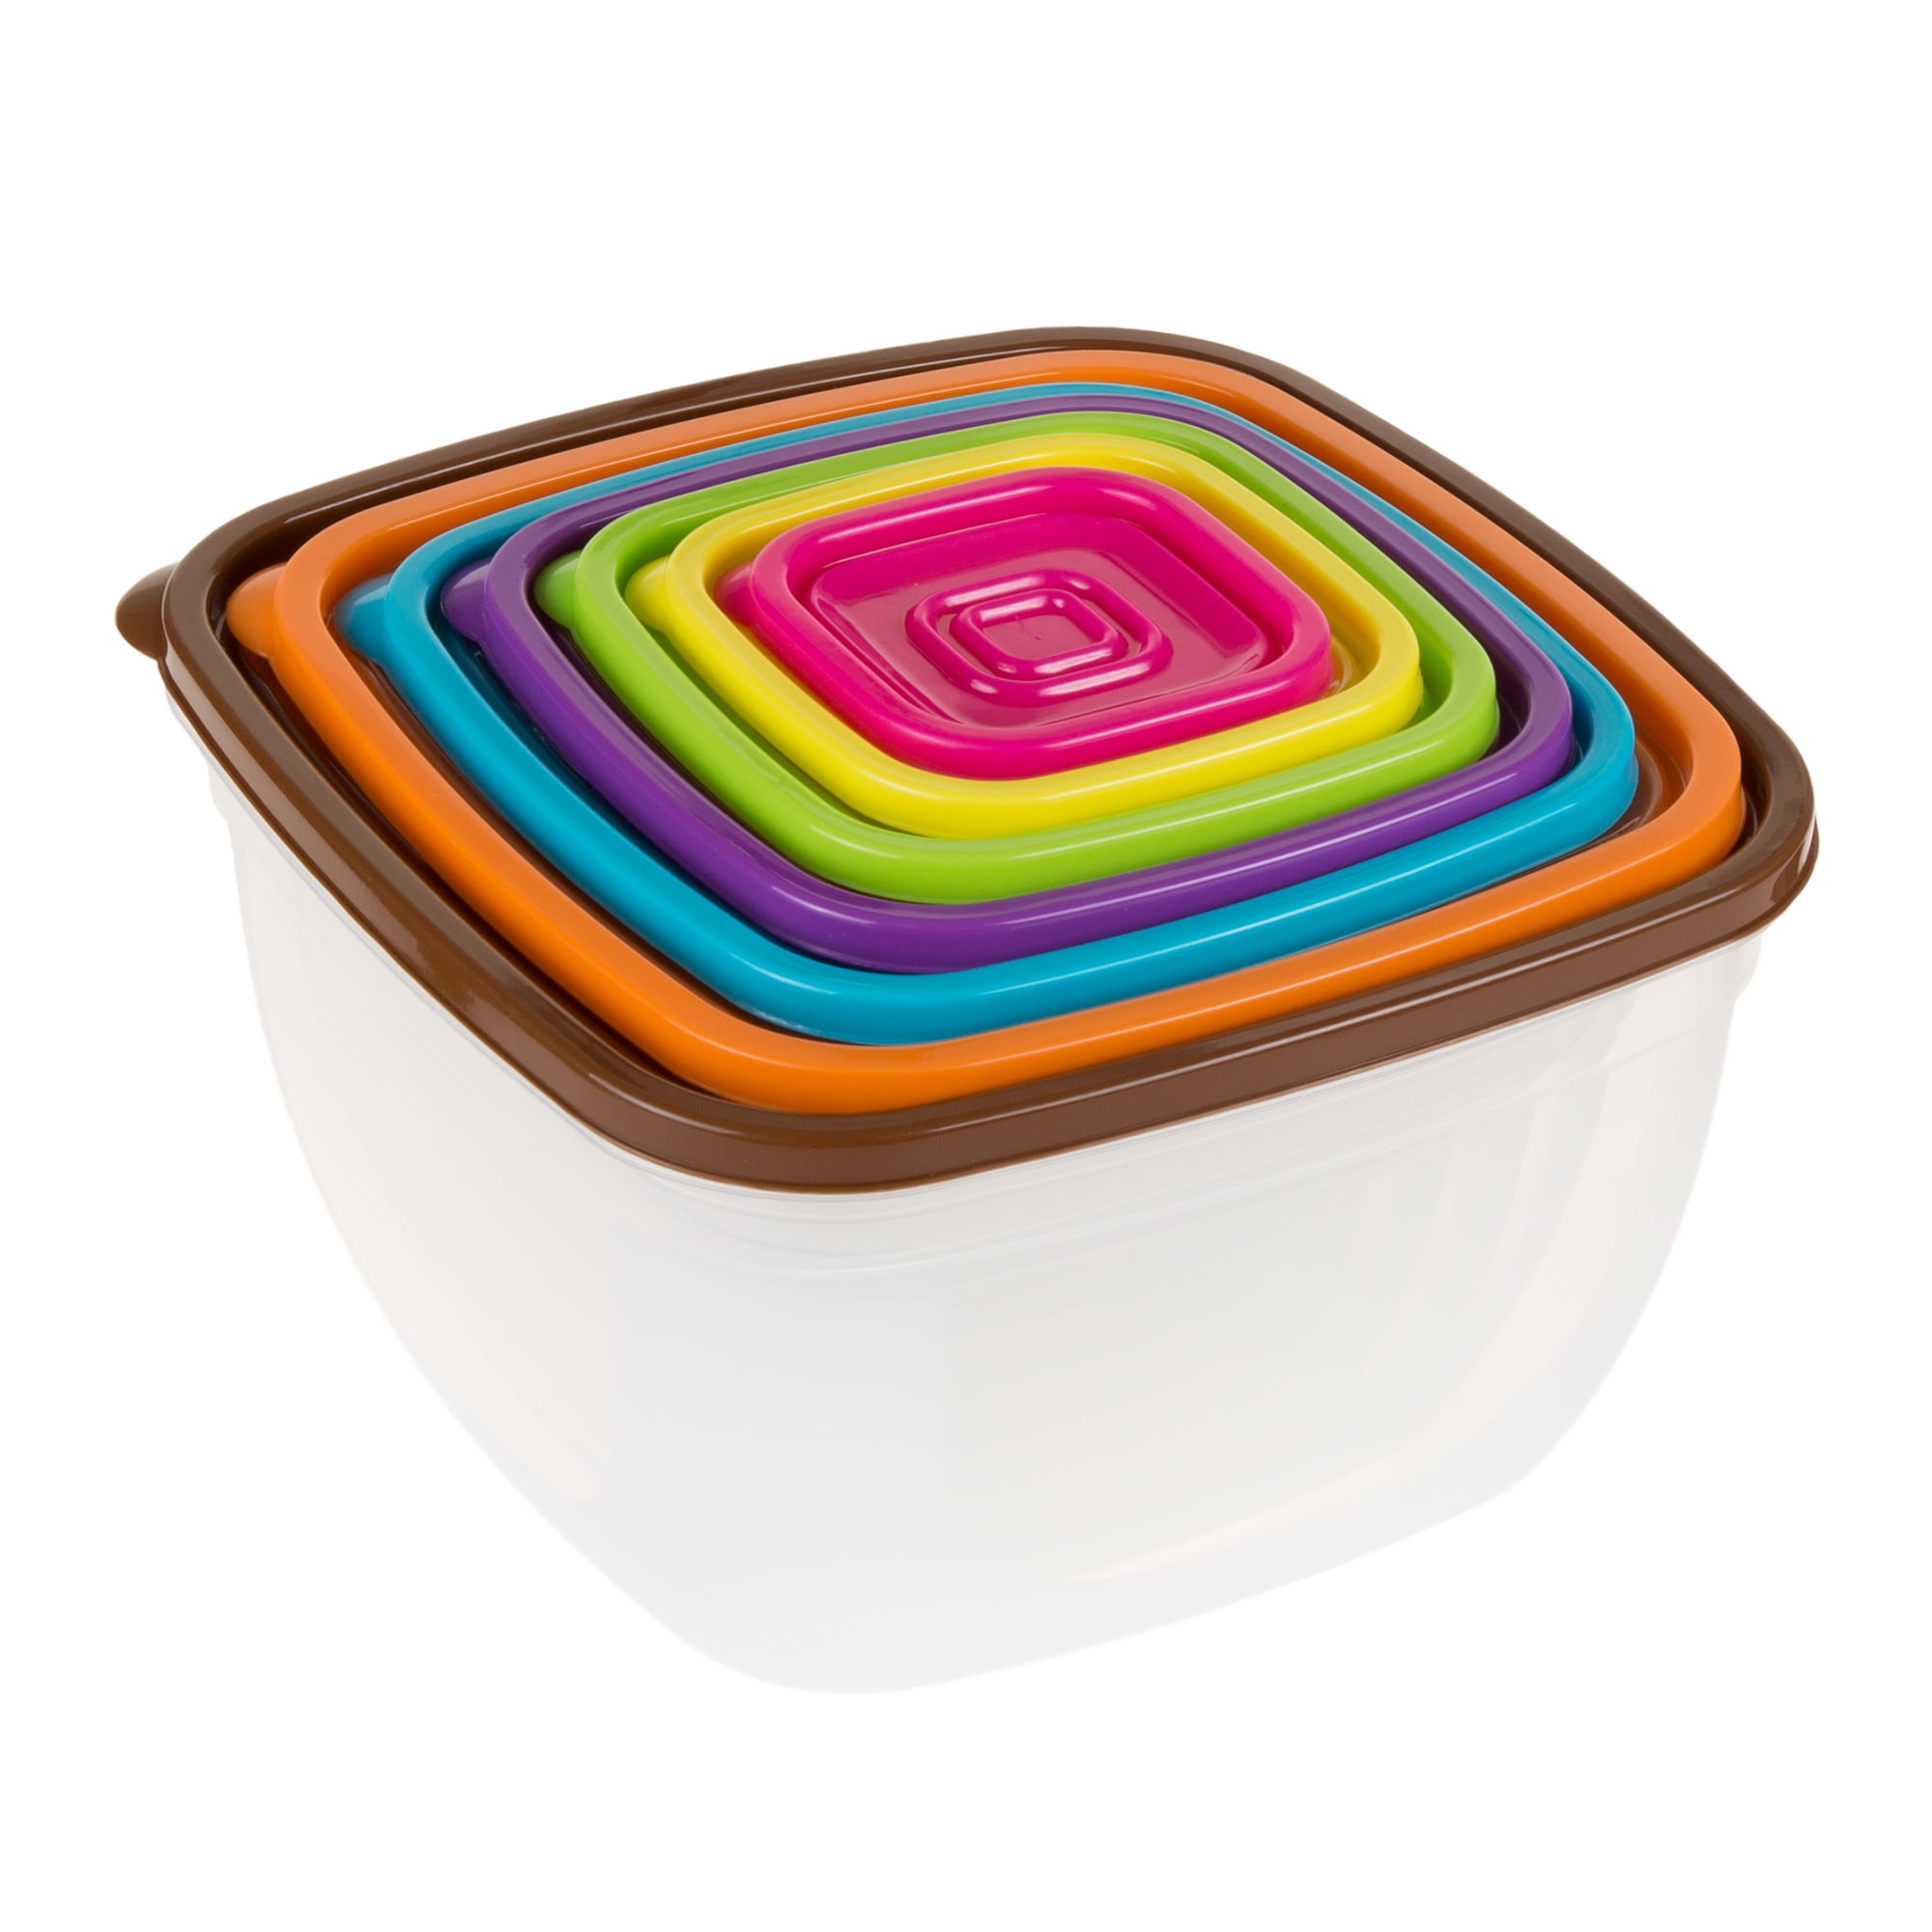 LocknLock Set of 10 Multi-Color Square Containers 